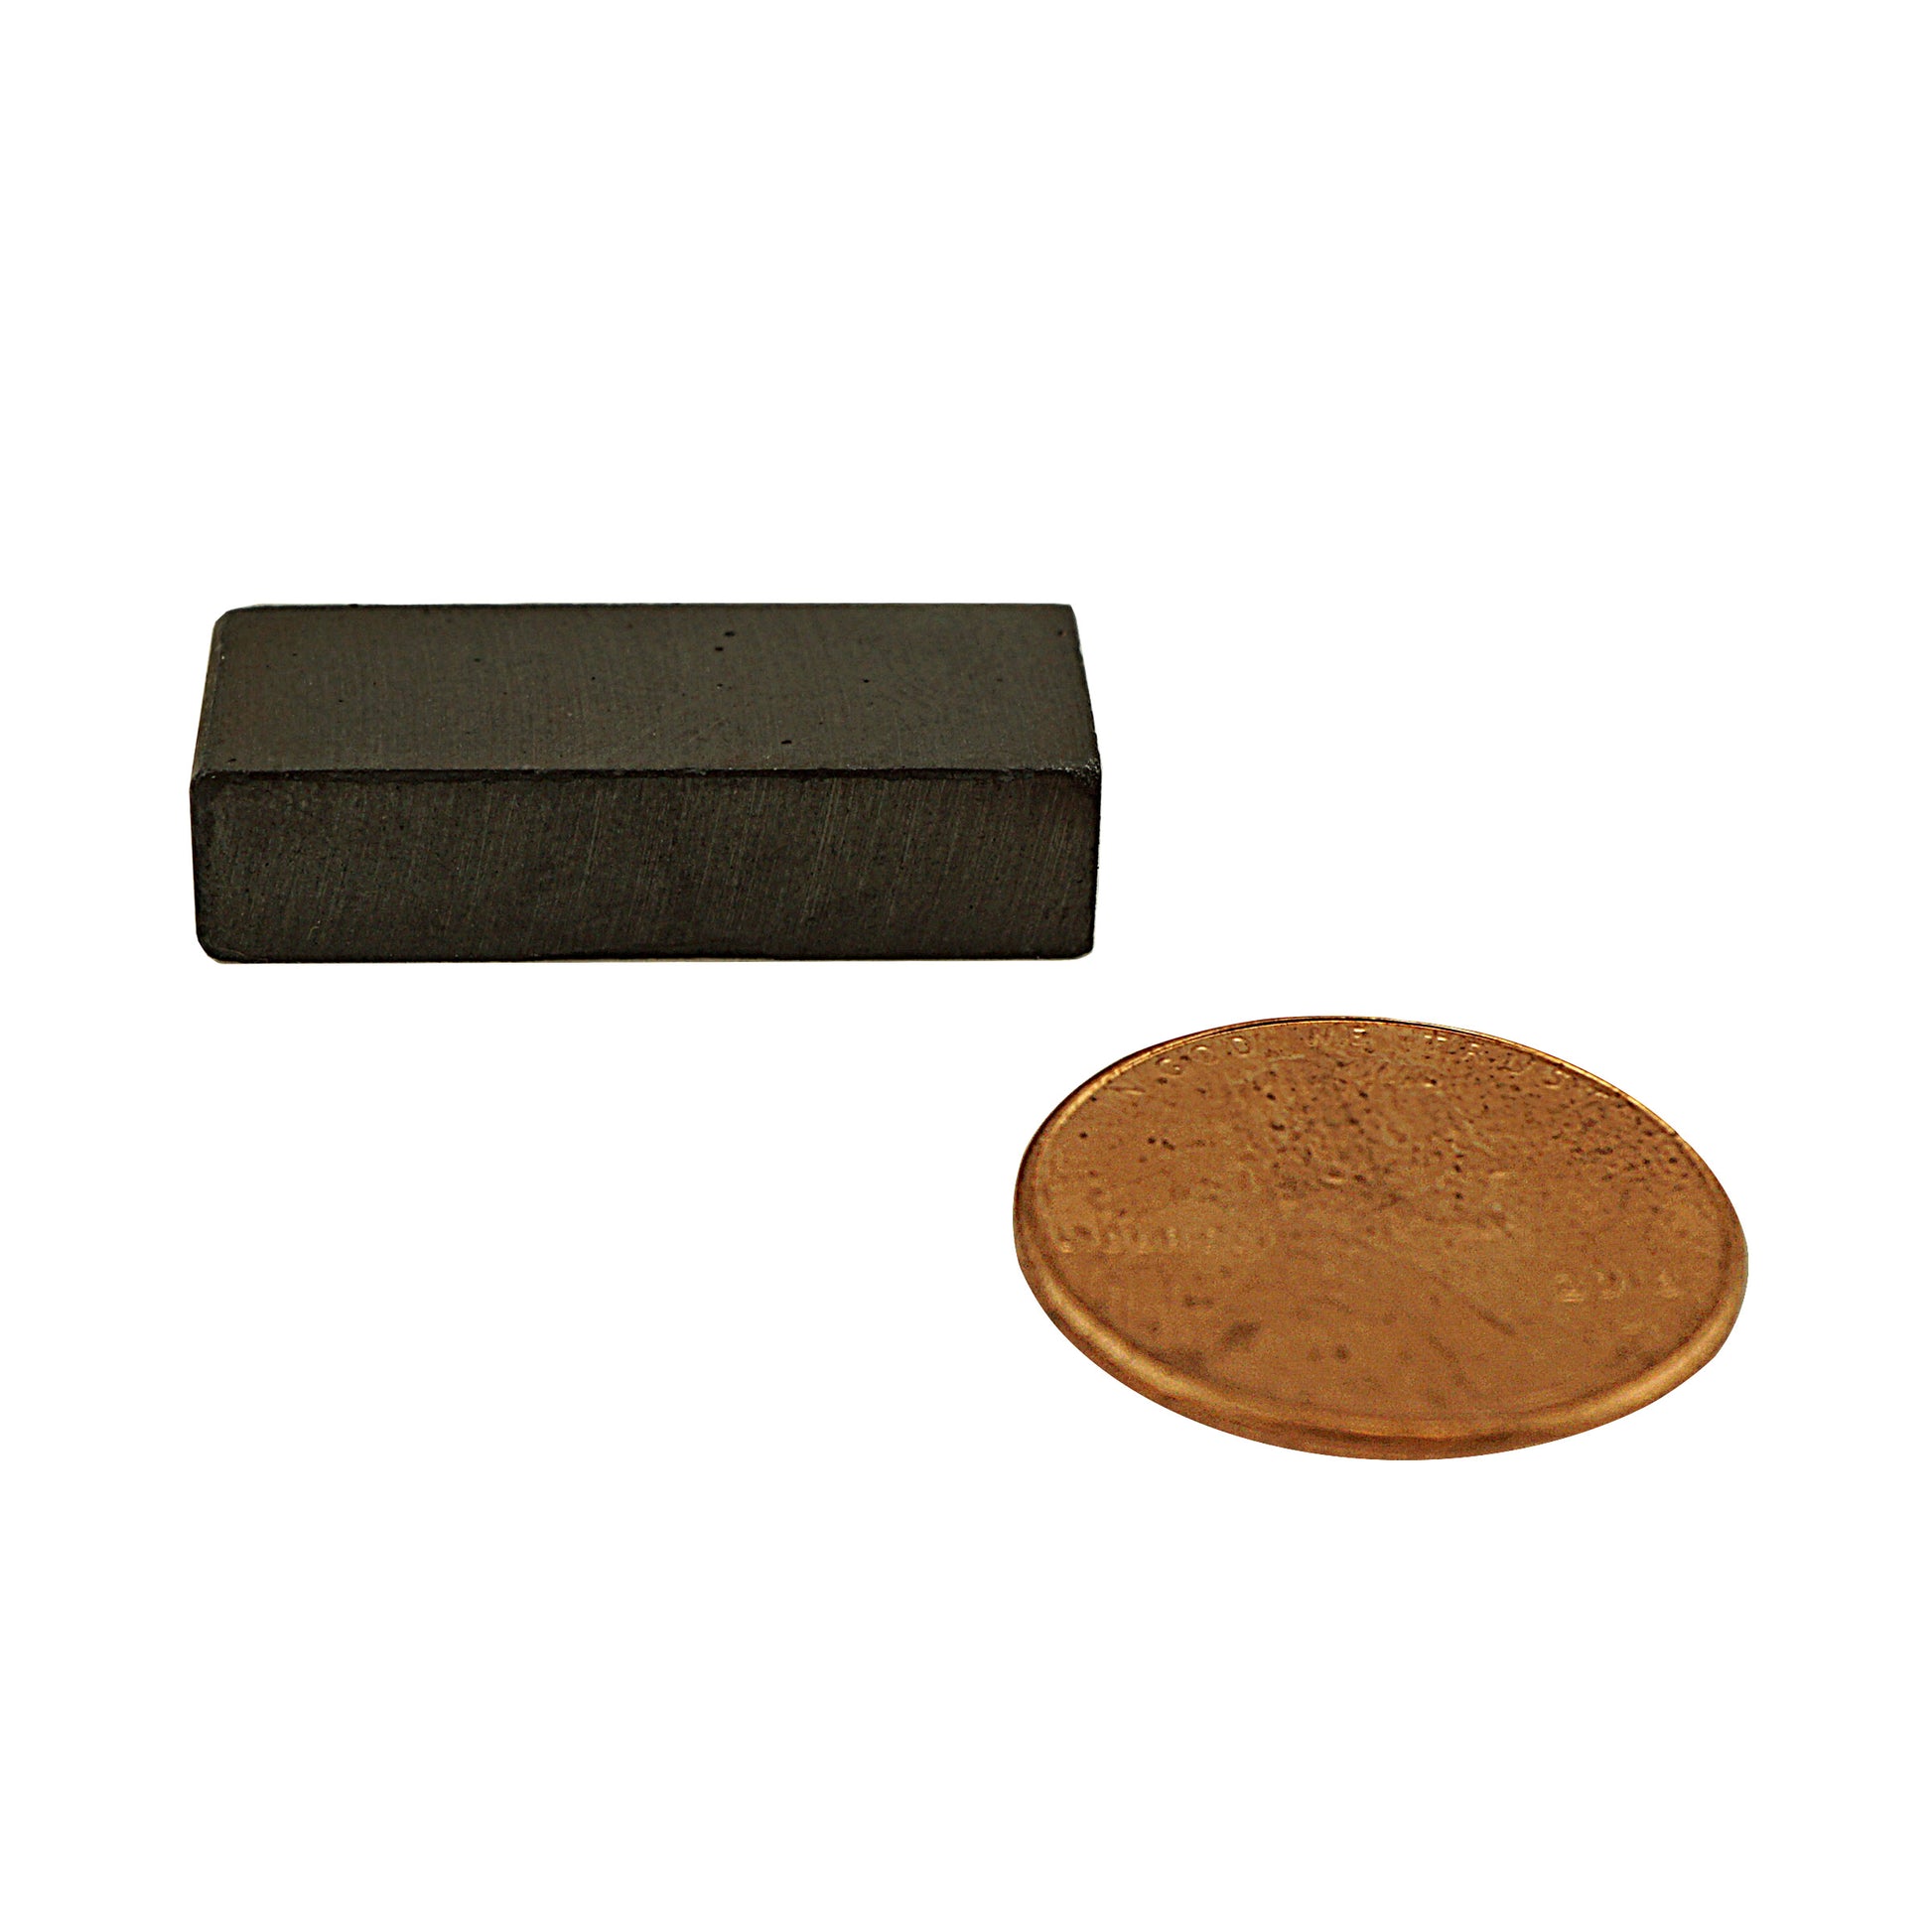 Load image into Gallery viewer, CB003911-S Ceramic Block Magnet - Compared to Penny for Size Reference